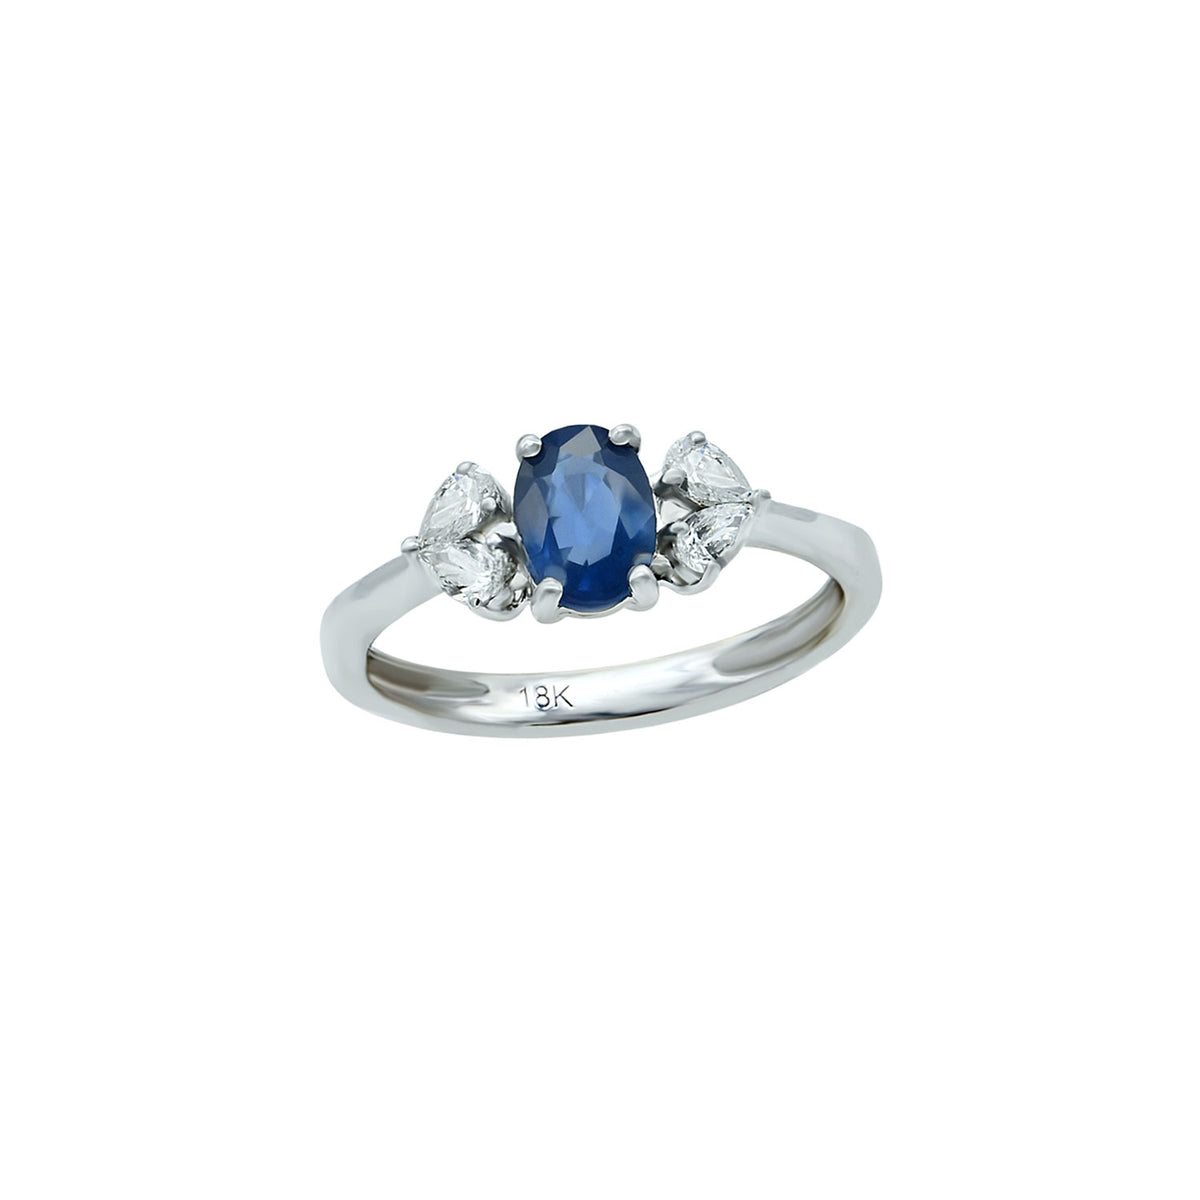 Sapphire ring. Diamond and sapphire ring. Oval sapphire ring. Promise ring.